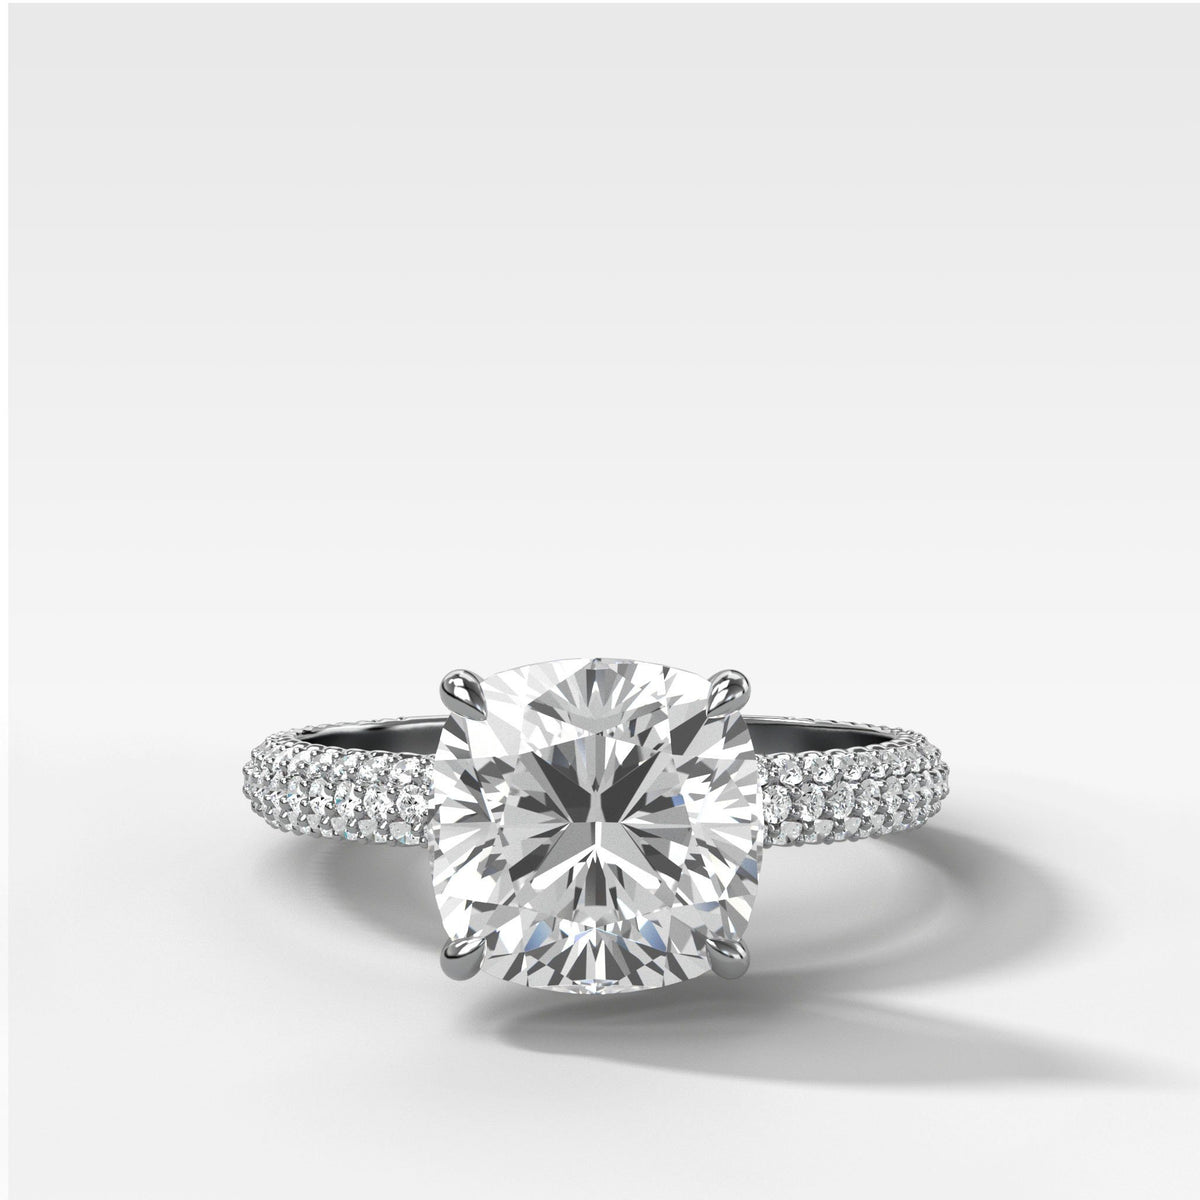 Triple Row Pavé Engagement Ring With Cushion Cut by Good Stone in White Gold